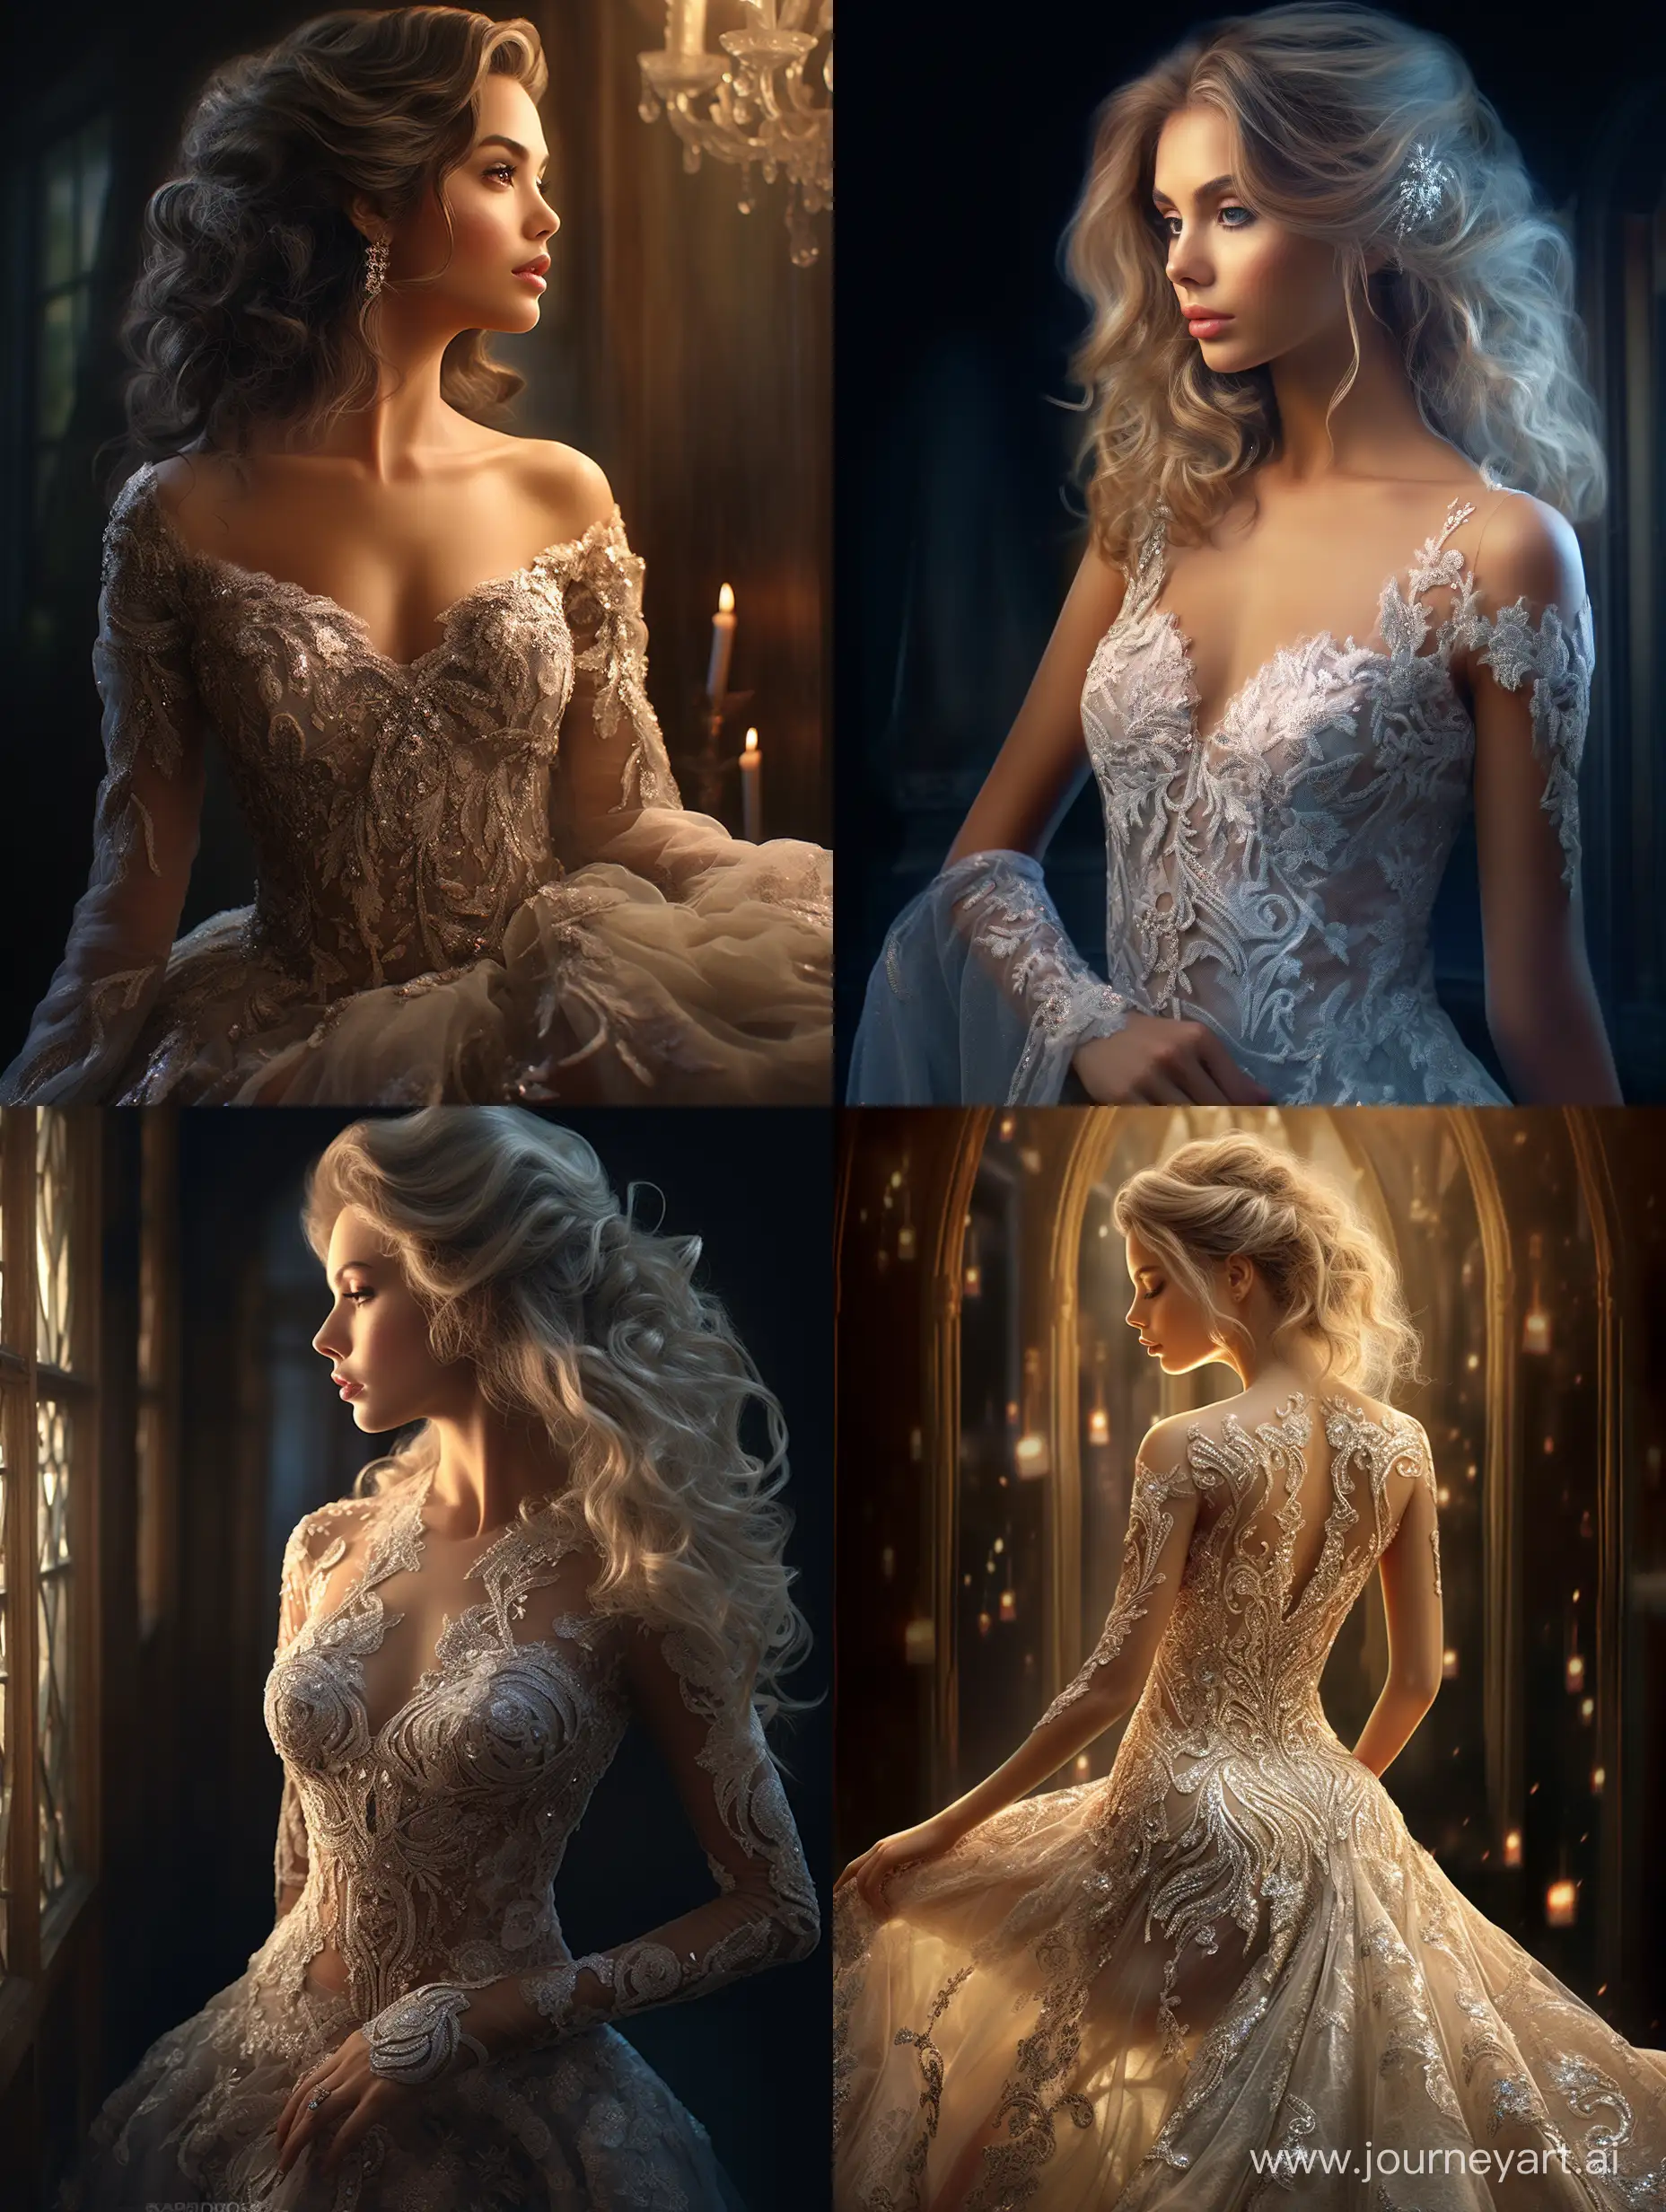 A mesmerizing photorealistic digital art portrait of a woman, illuminated by the soft glow of back lighting. The woman is adorned in a stunning gown, reminiscent of a Disney princess, with intricate lace and silk details. Her beauty is enhanced by the elegant Swarovski jewelry she wears, which sparkles delicately in the light. The artwork exudes a sense of enchantment and fantasy, with vibrant colors and meticulous attention to detail. This portrait captures the essence of beauty, grace, and elegance, in a style that is both photorealistic and reminiscent of the magic of Disney. Canon EF 50mm f/1.2L USM lens, ISO 100, f/2.8, 1/125s